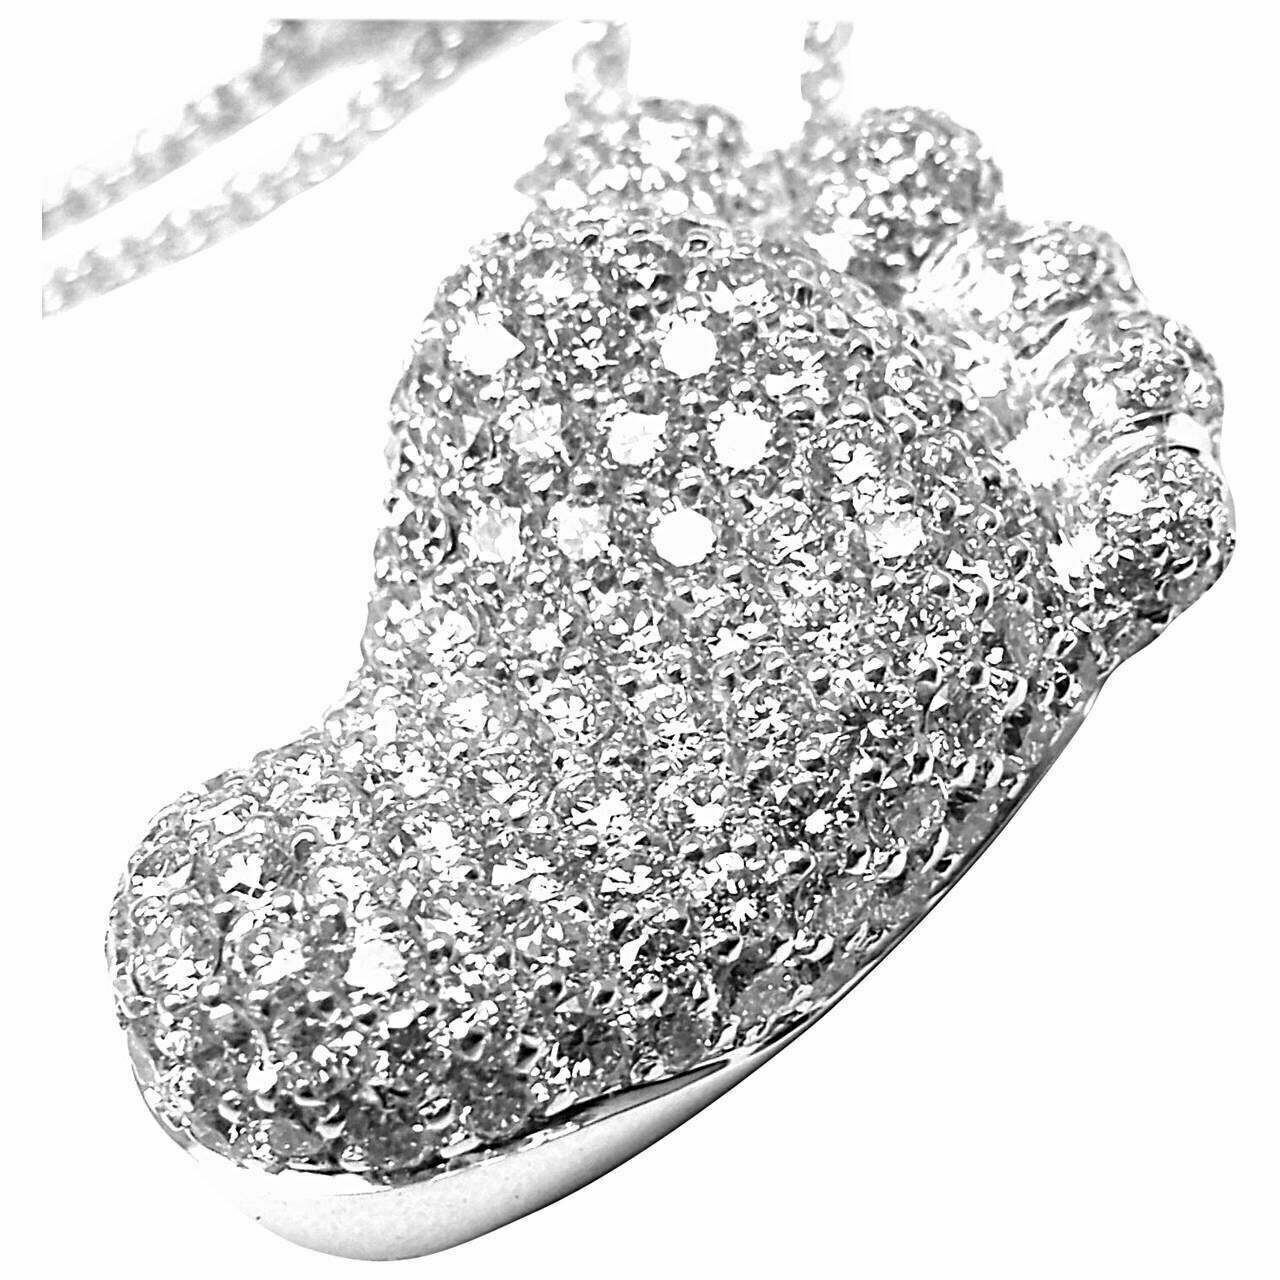 Pasquale Bruni Jewelry & Watches:Fine Jewelry:Necklaces & Pendants New! Authentic Pasquale Bruni 18k White Gold Diamond Foot Prints Orme Necklace